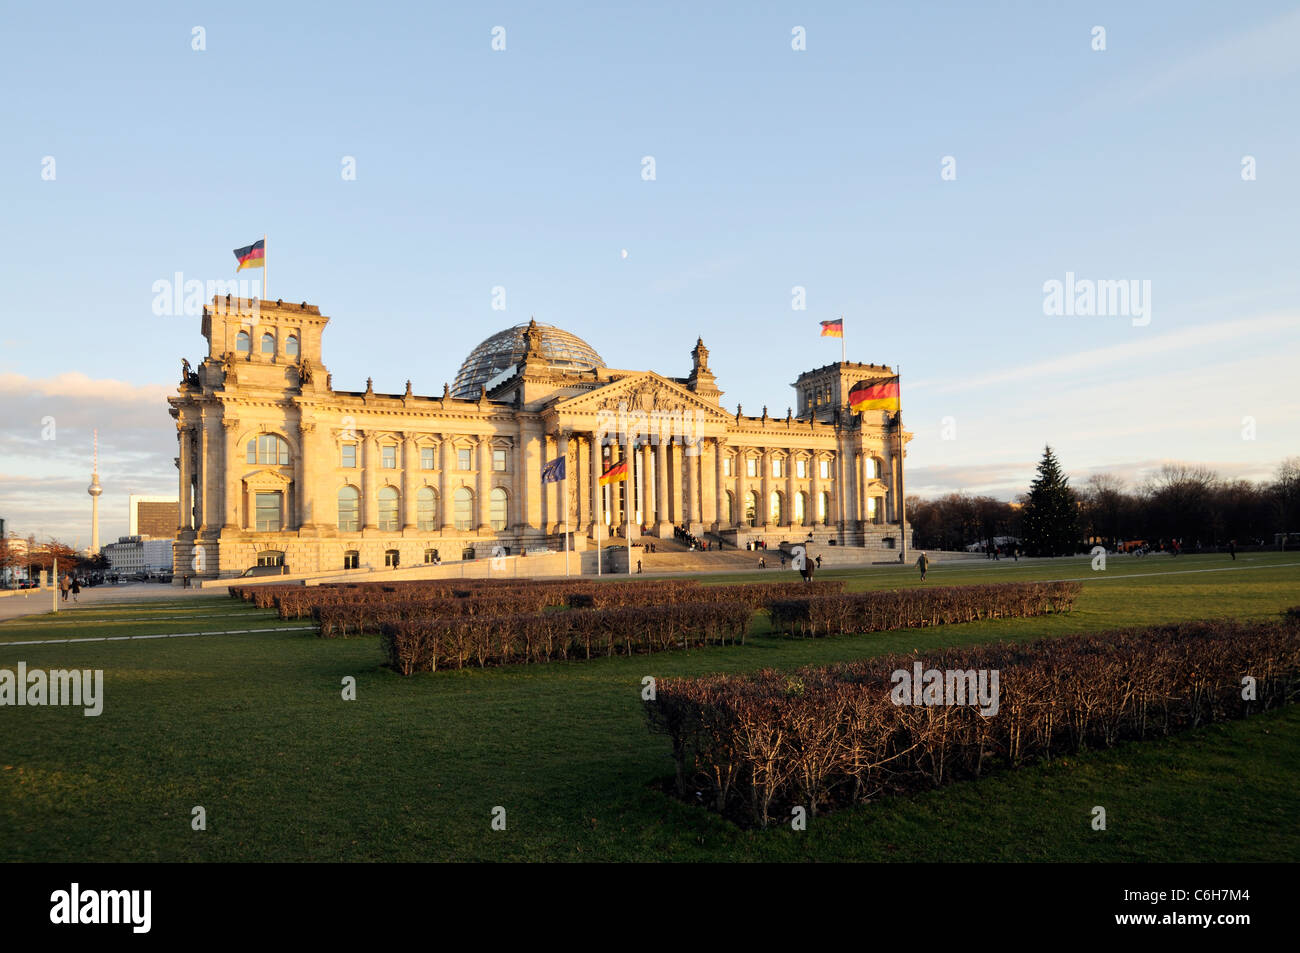 Warm evening sunlight illuminating the mighty Reichstag parliament with clear blue sky and flags flying. Stock Photo